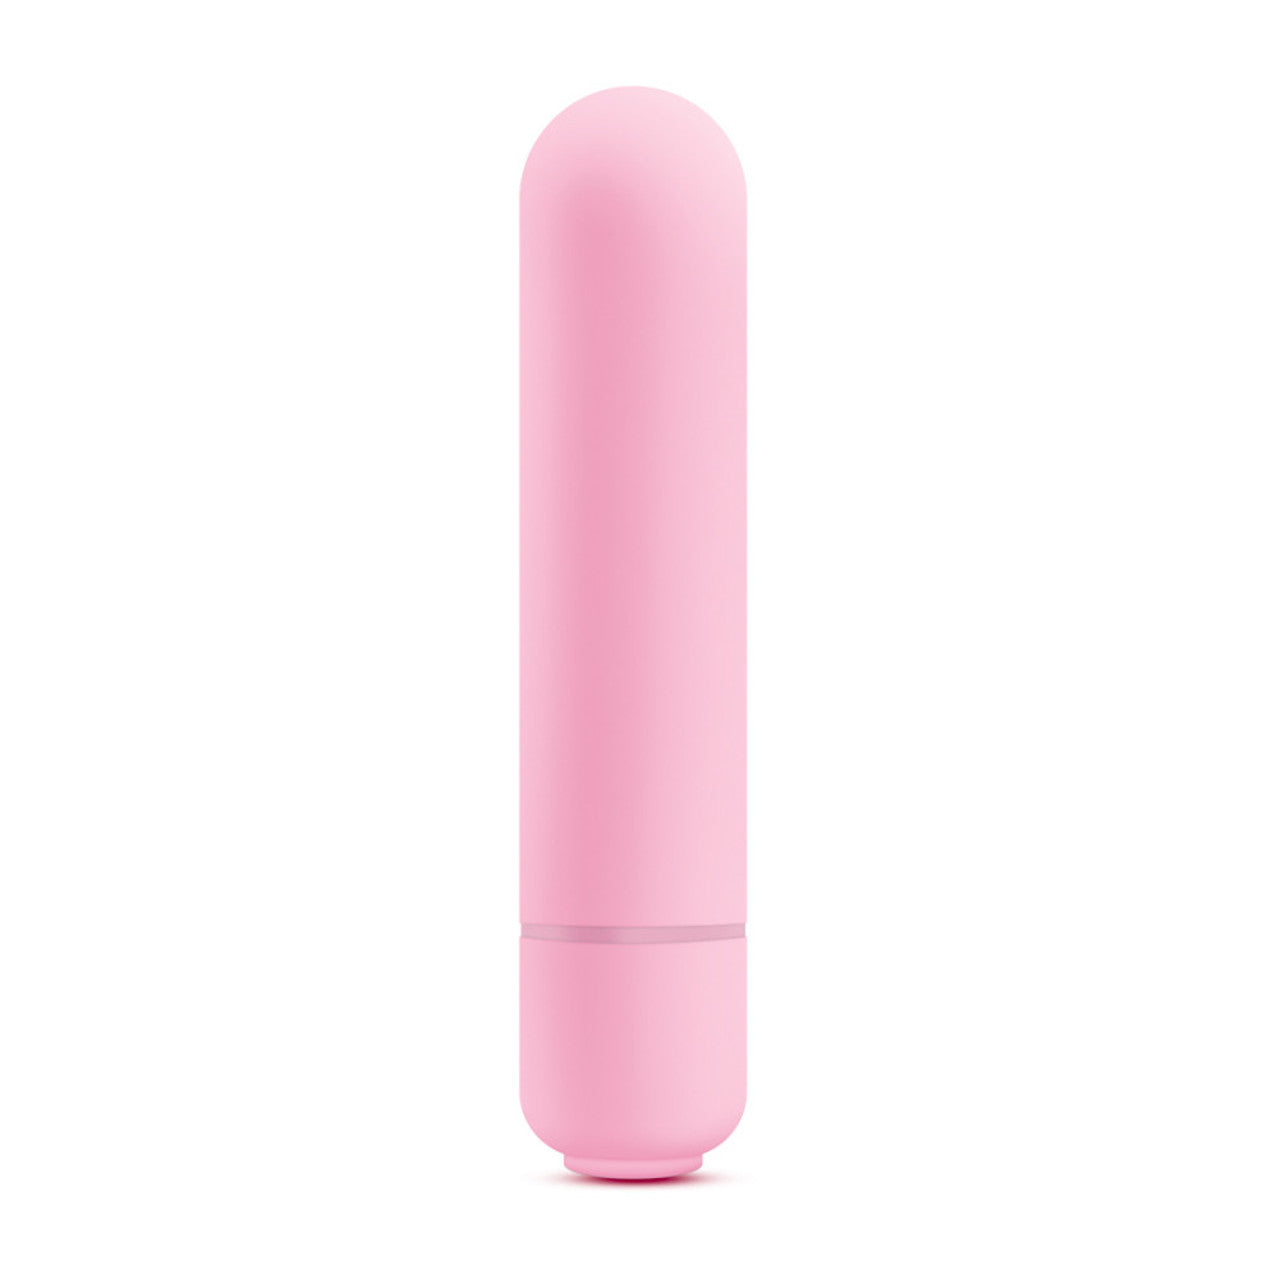 Vive Pop Vibe - Pink - Thorn & Feather Sex Toy Canada